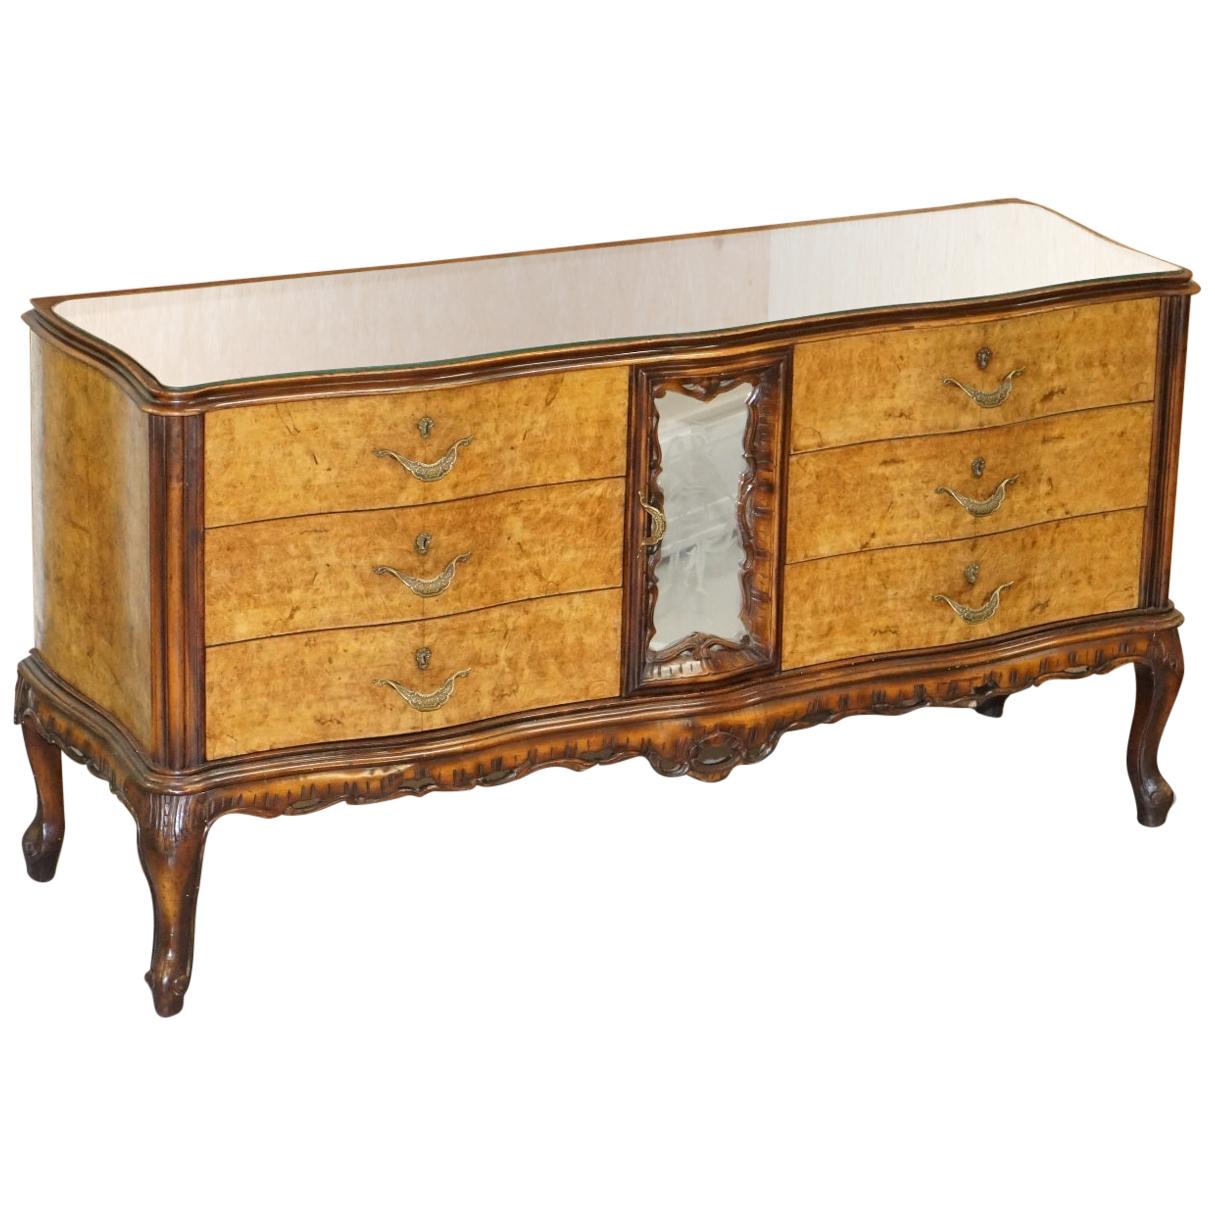 Sublime Vintage Italian Burr Walnut Serpentine Fronted Sideboard Mirrored Top For Sale